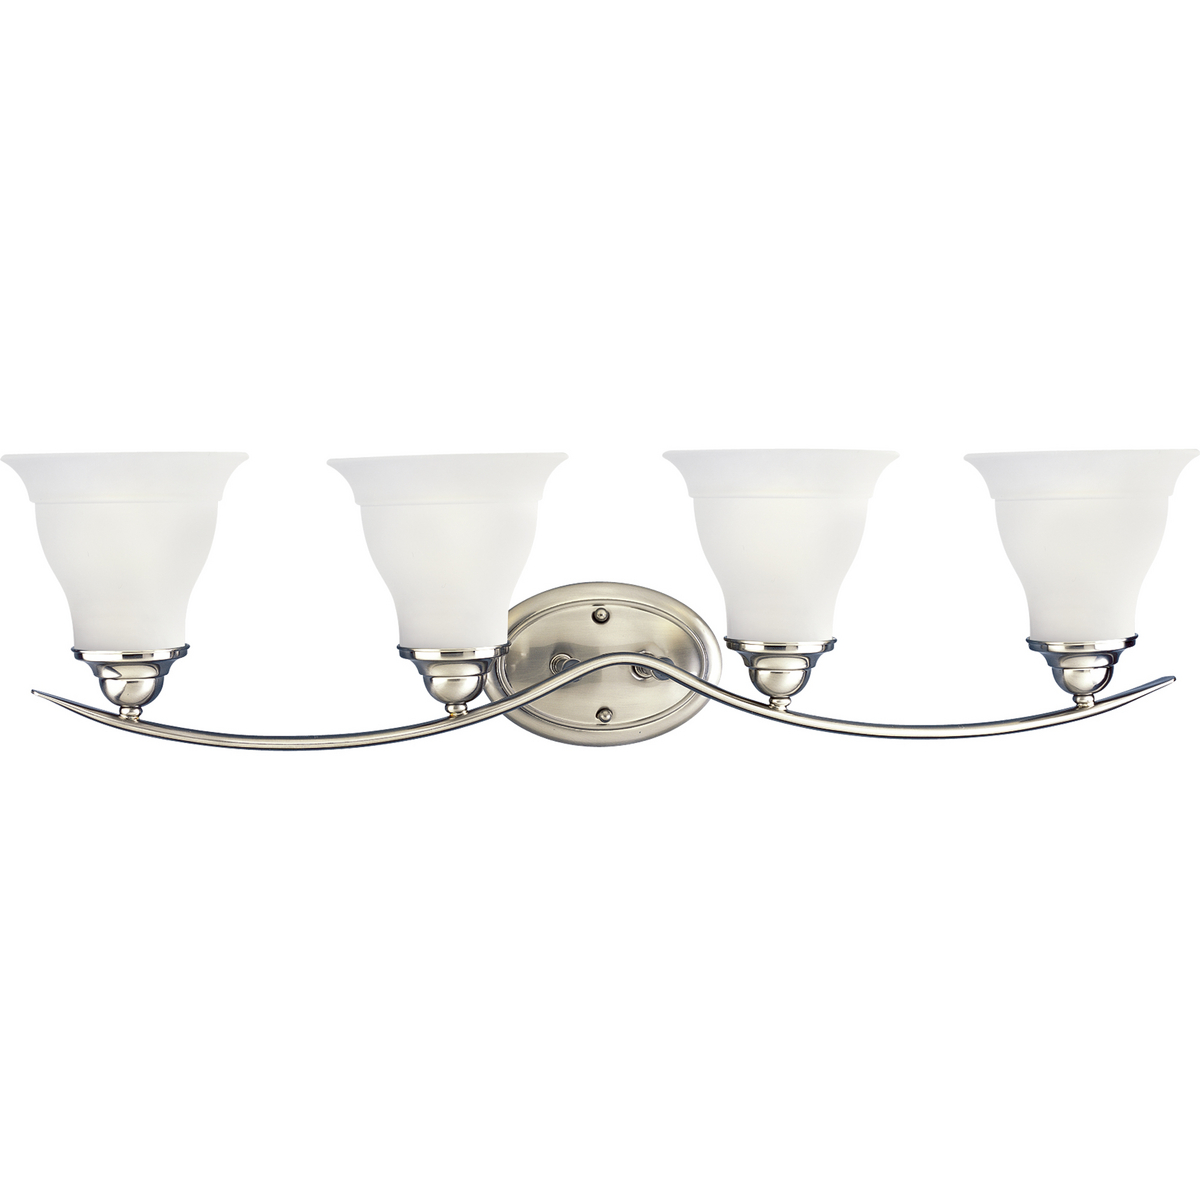 Four-light bath fixture featuring soft angles, curving lines and etched glass shades that mount up or down. Gracefully exotic, the Trinity Collection offers classic sophistication for transitional interiors. Sculptural forms of metal and glass are enhanced by a classic finish. This transitional style can transform a room or your whole home with its charming versatility. Brushed Nickel finish.